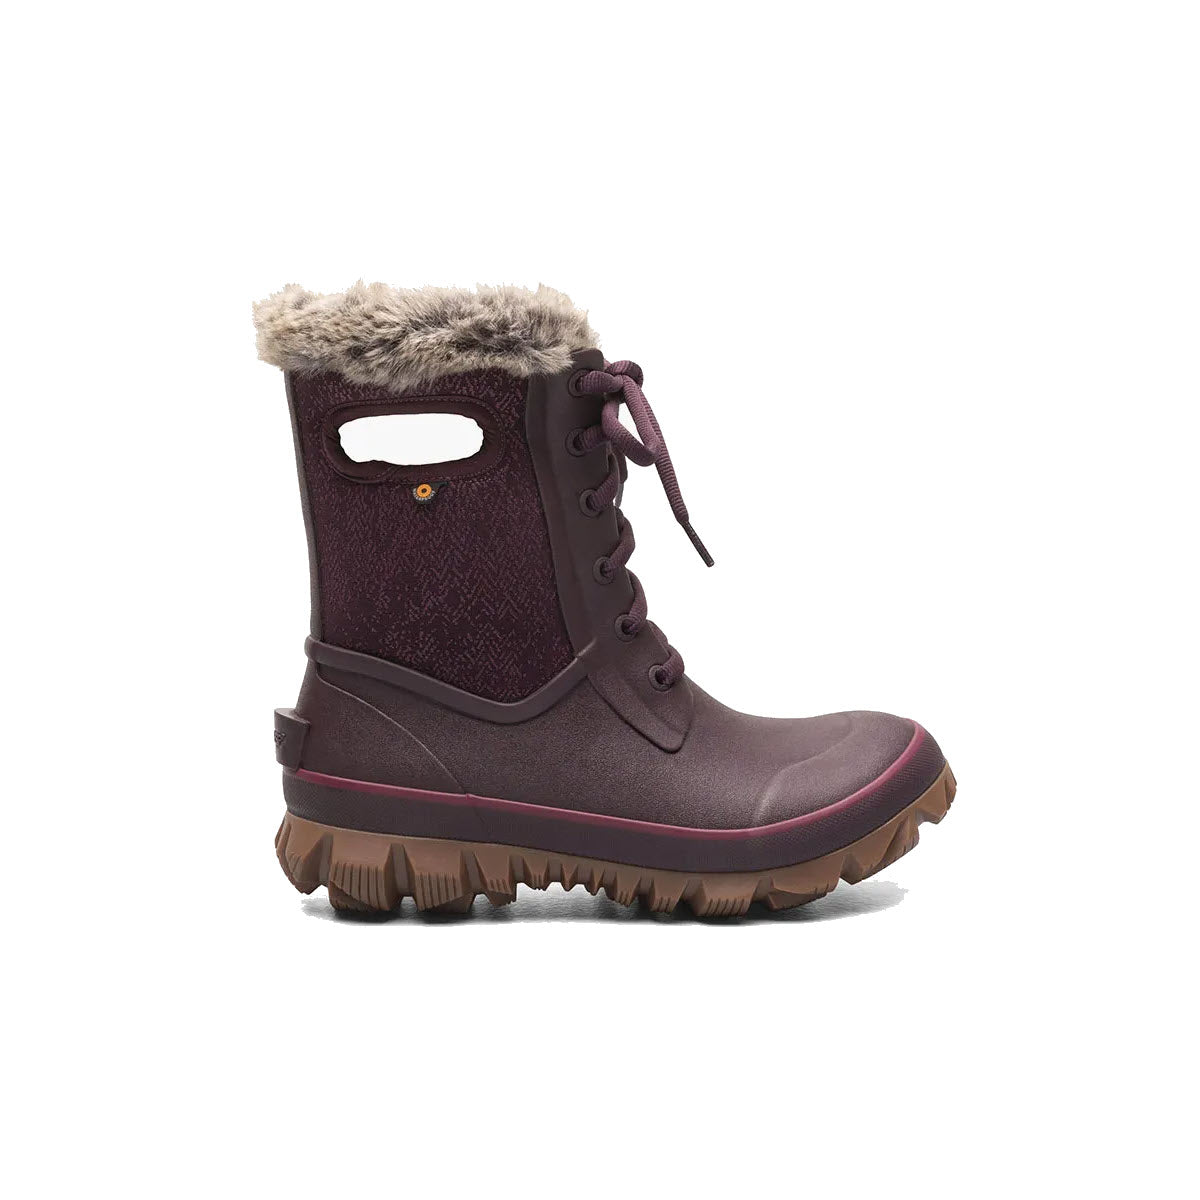 A dark purple Bogs Arcata Faded Wine - Womens winter boot with fur-lined interior, laced up front, and a sturdy, ridged sole, isolated on a white background.